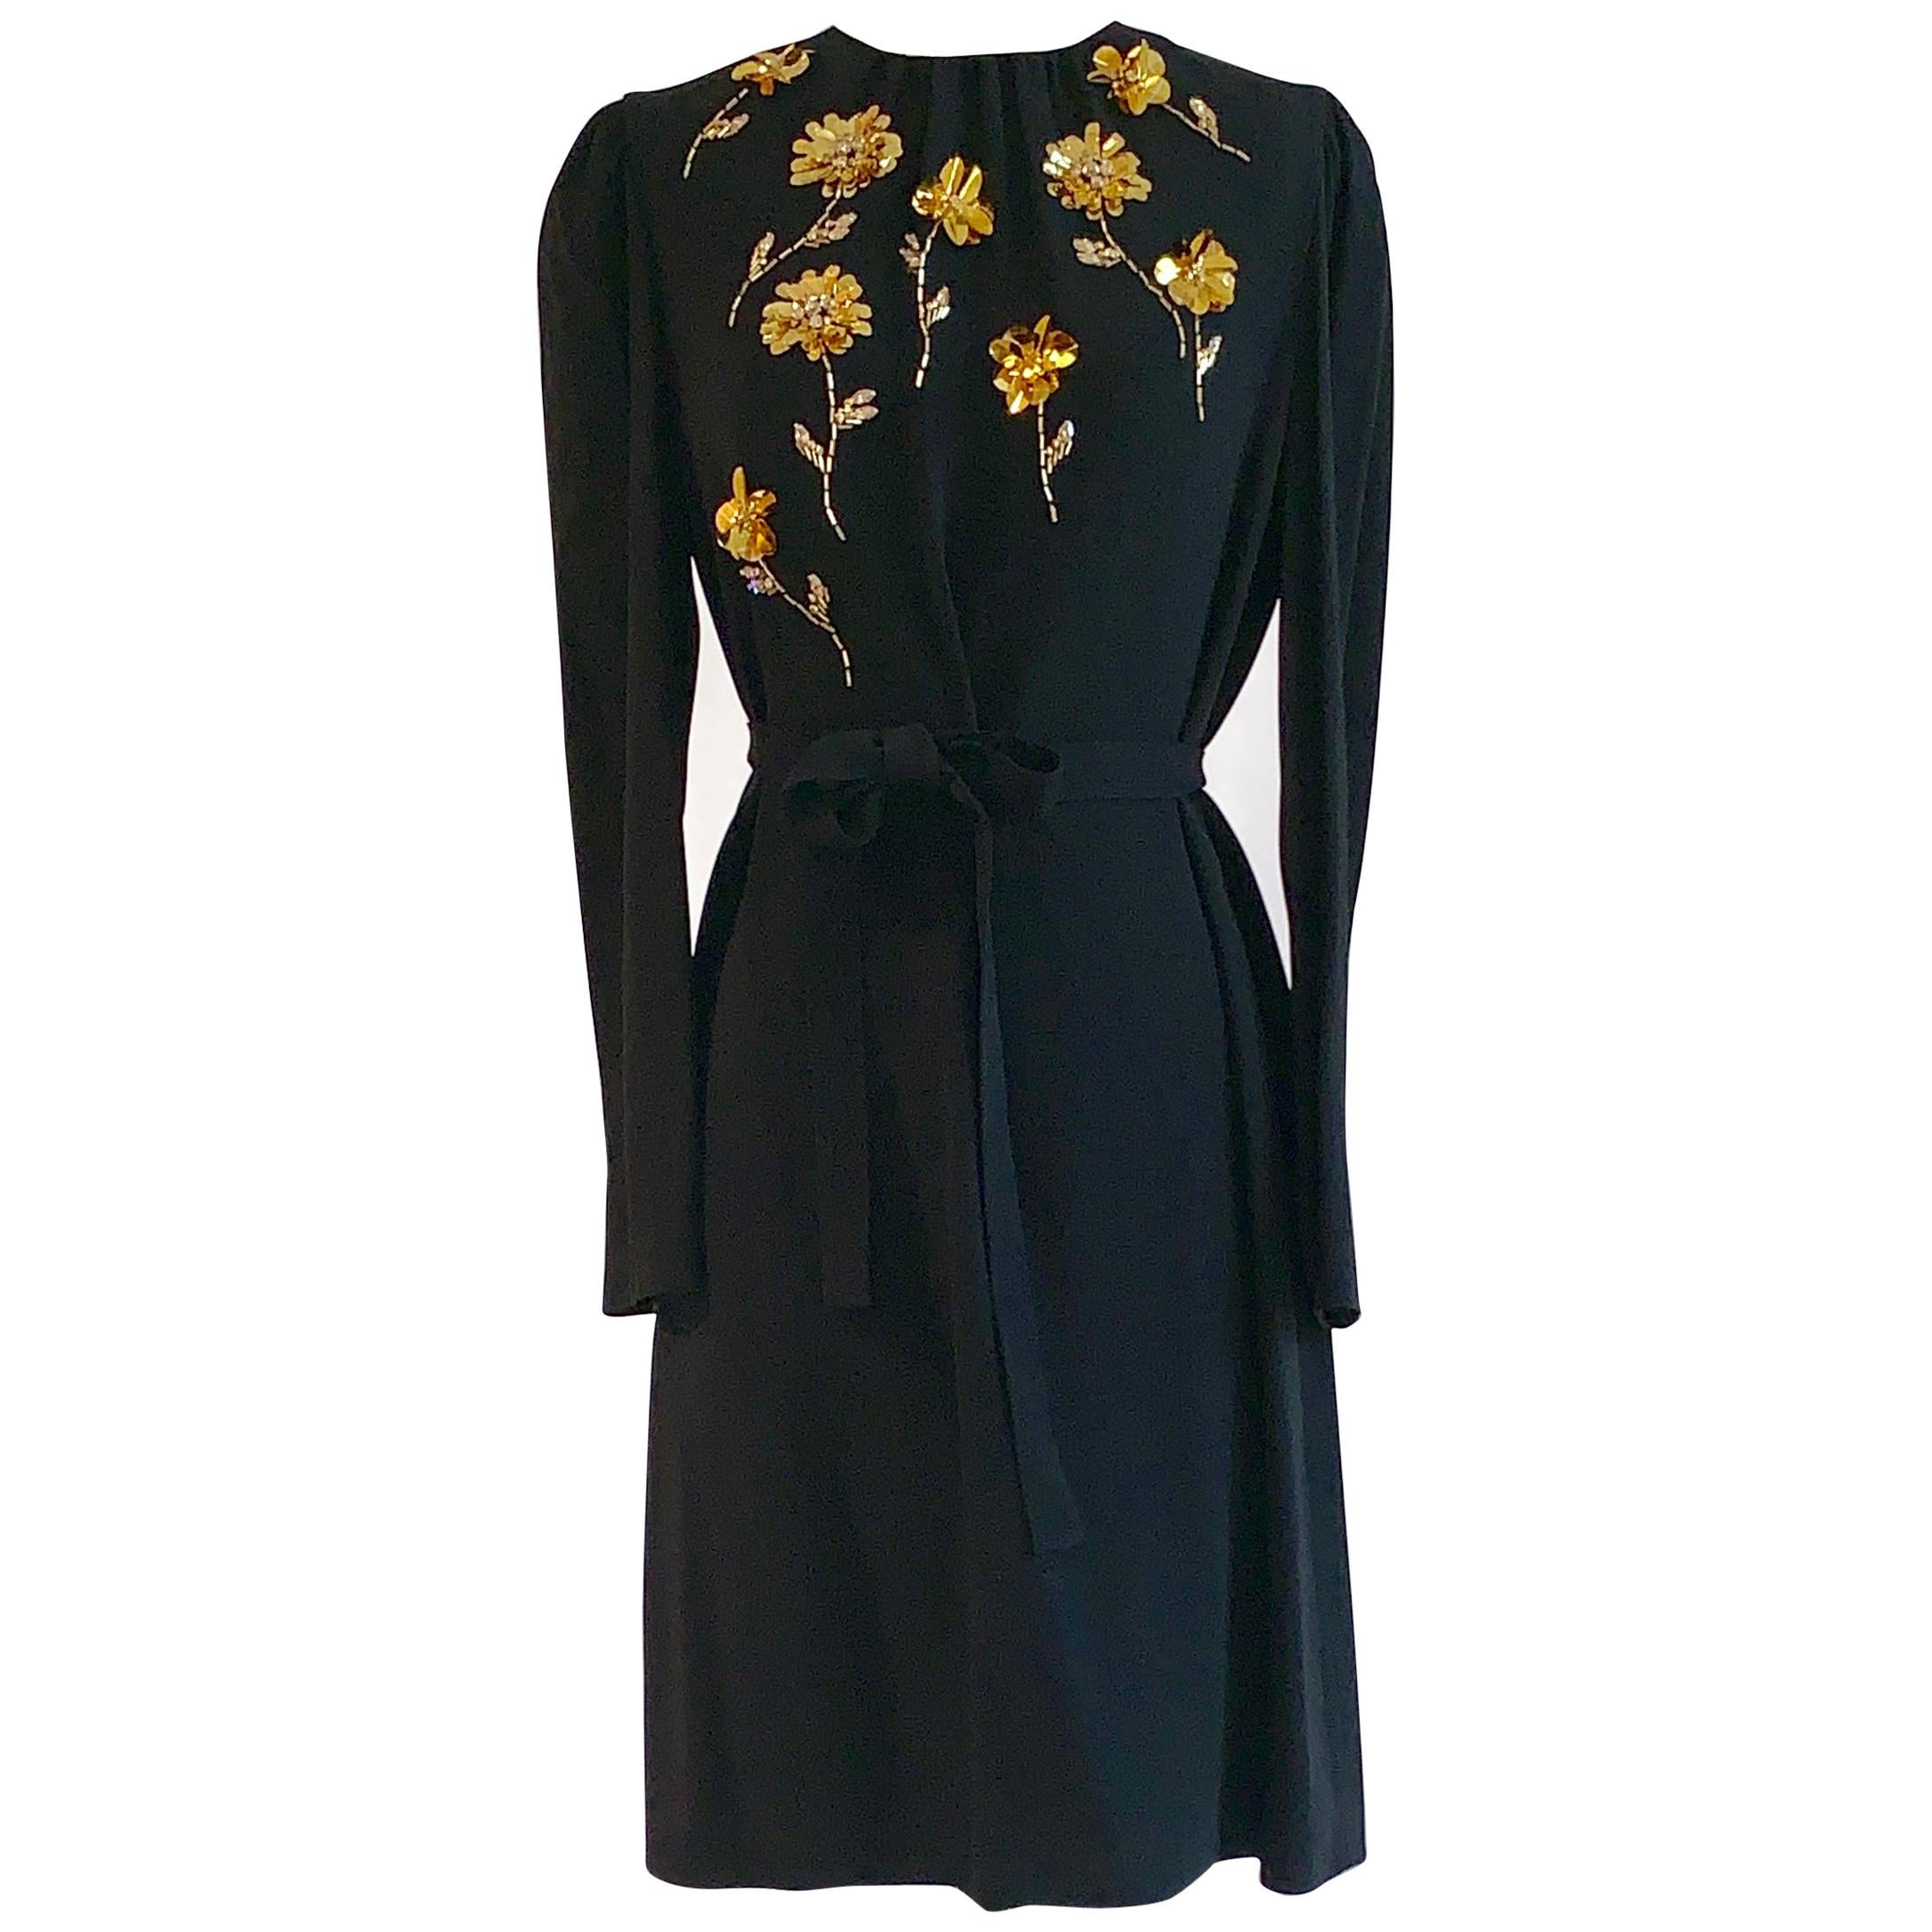 Prada Black Dress with Gold Floral Beadwork Long Sleeve Shift with Tie Belt